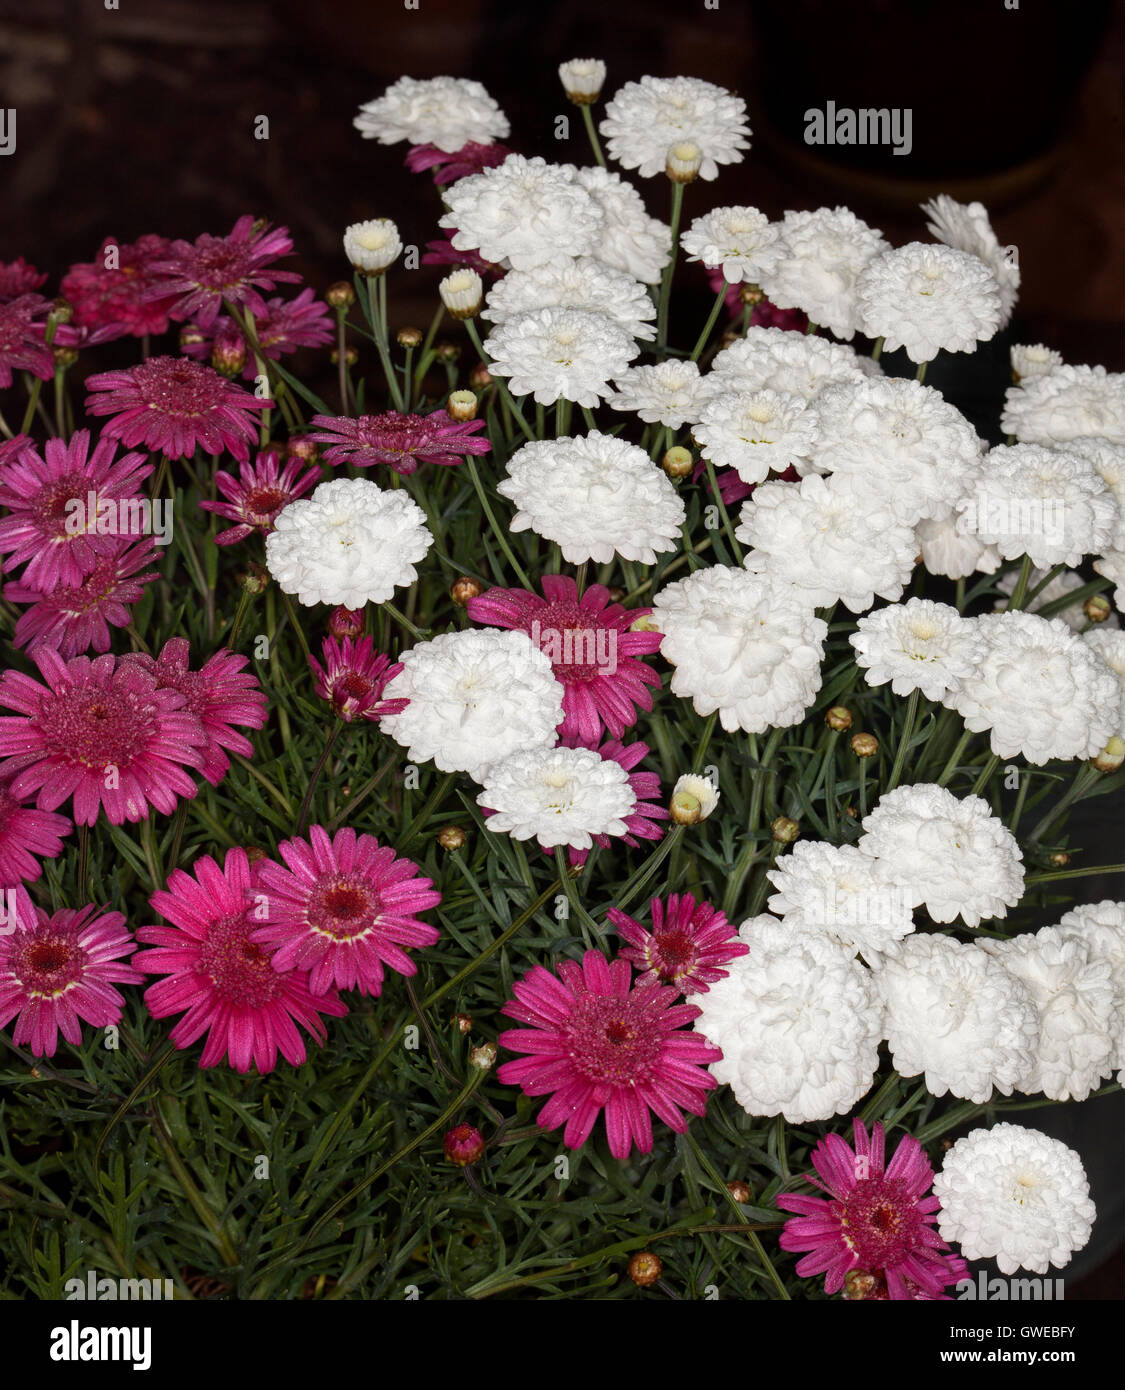 Large cluster of stunning red & white flowers, buds & leaves of Argyranthemum frutescens, perennial daisies on dark background Stock Photo